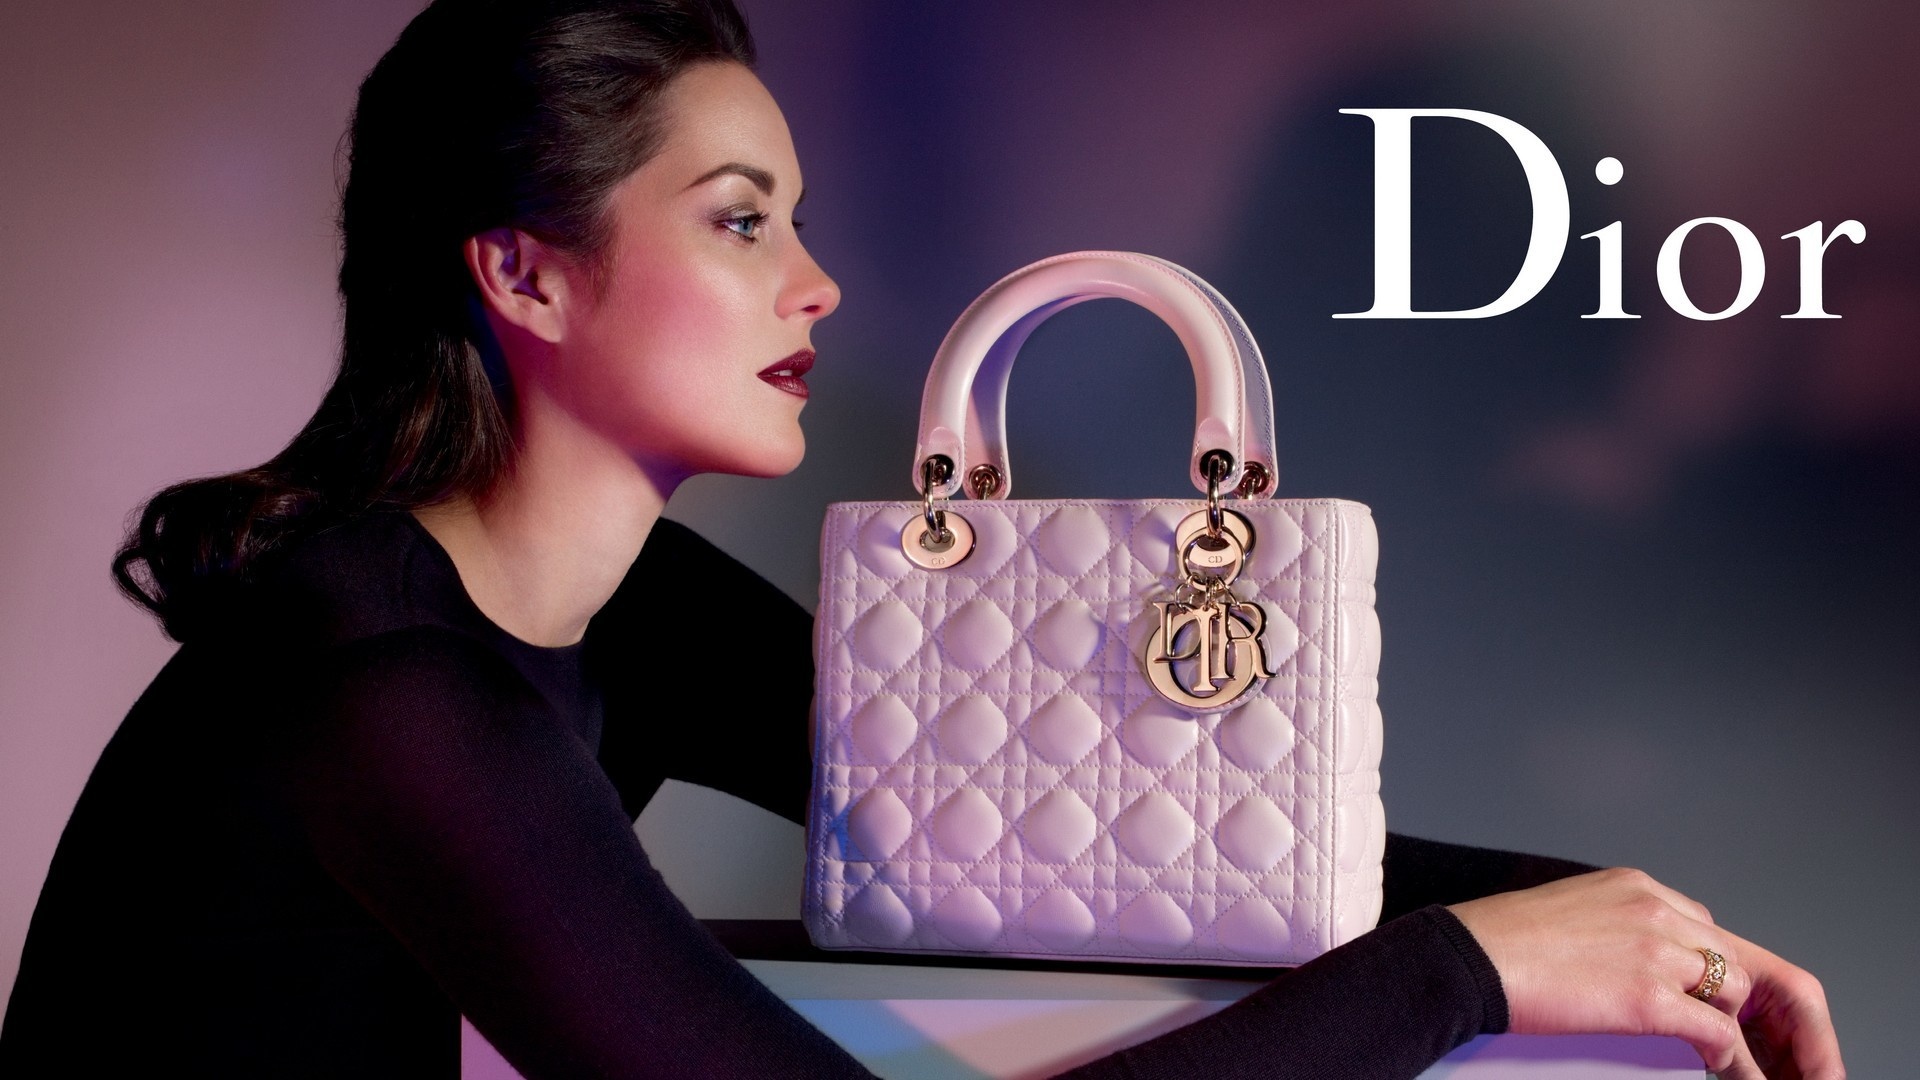 Dior: Marion Cotillard, The Lady Dior, Iconic leather goods. 1920x1080 Full HD Wallpaper.